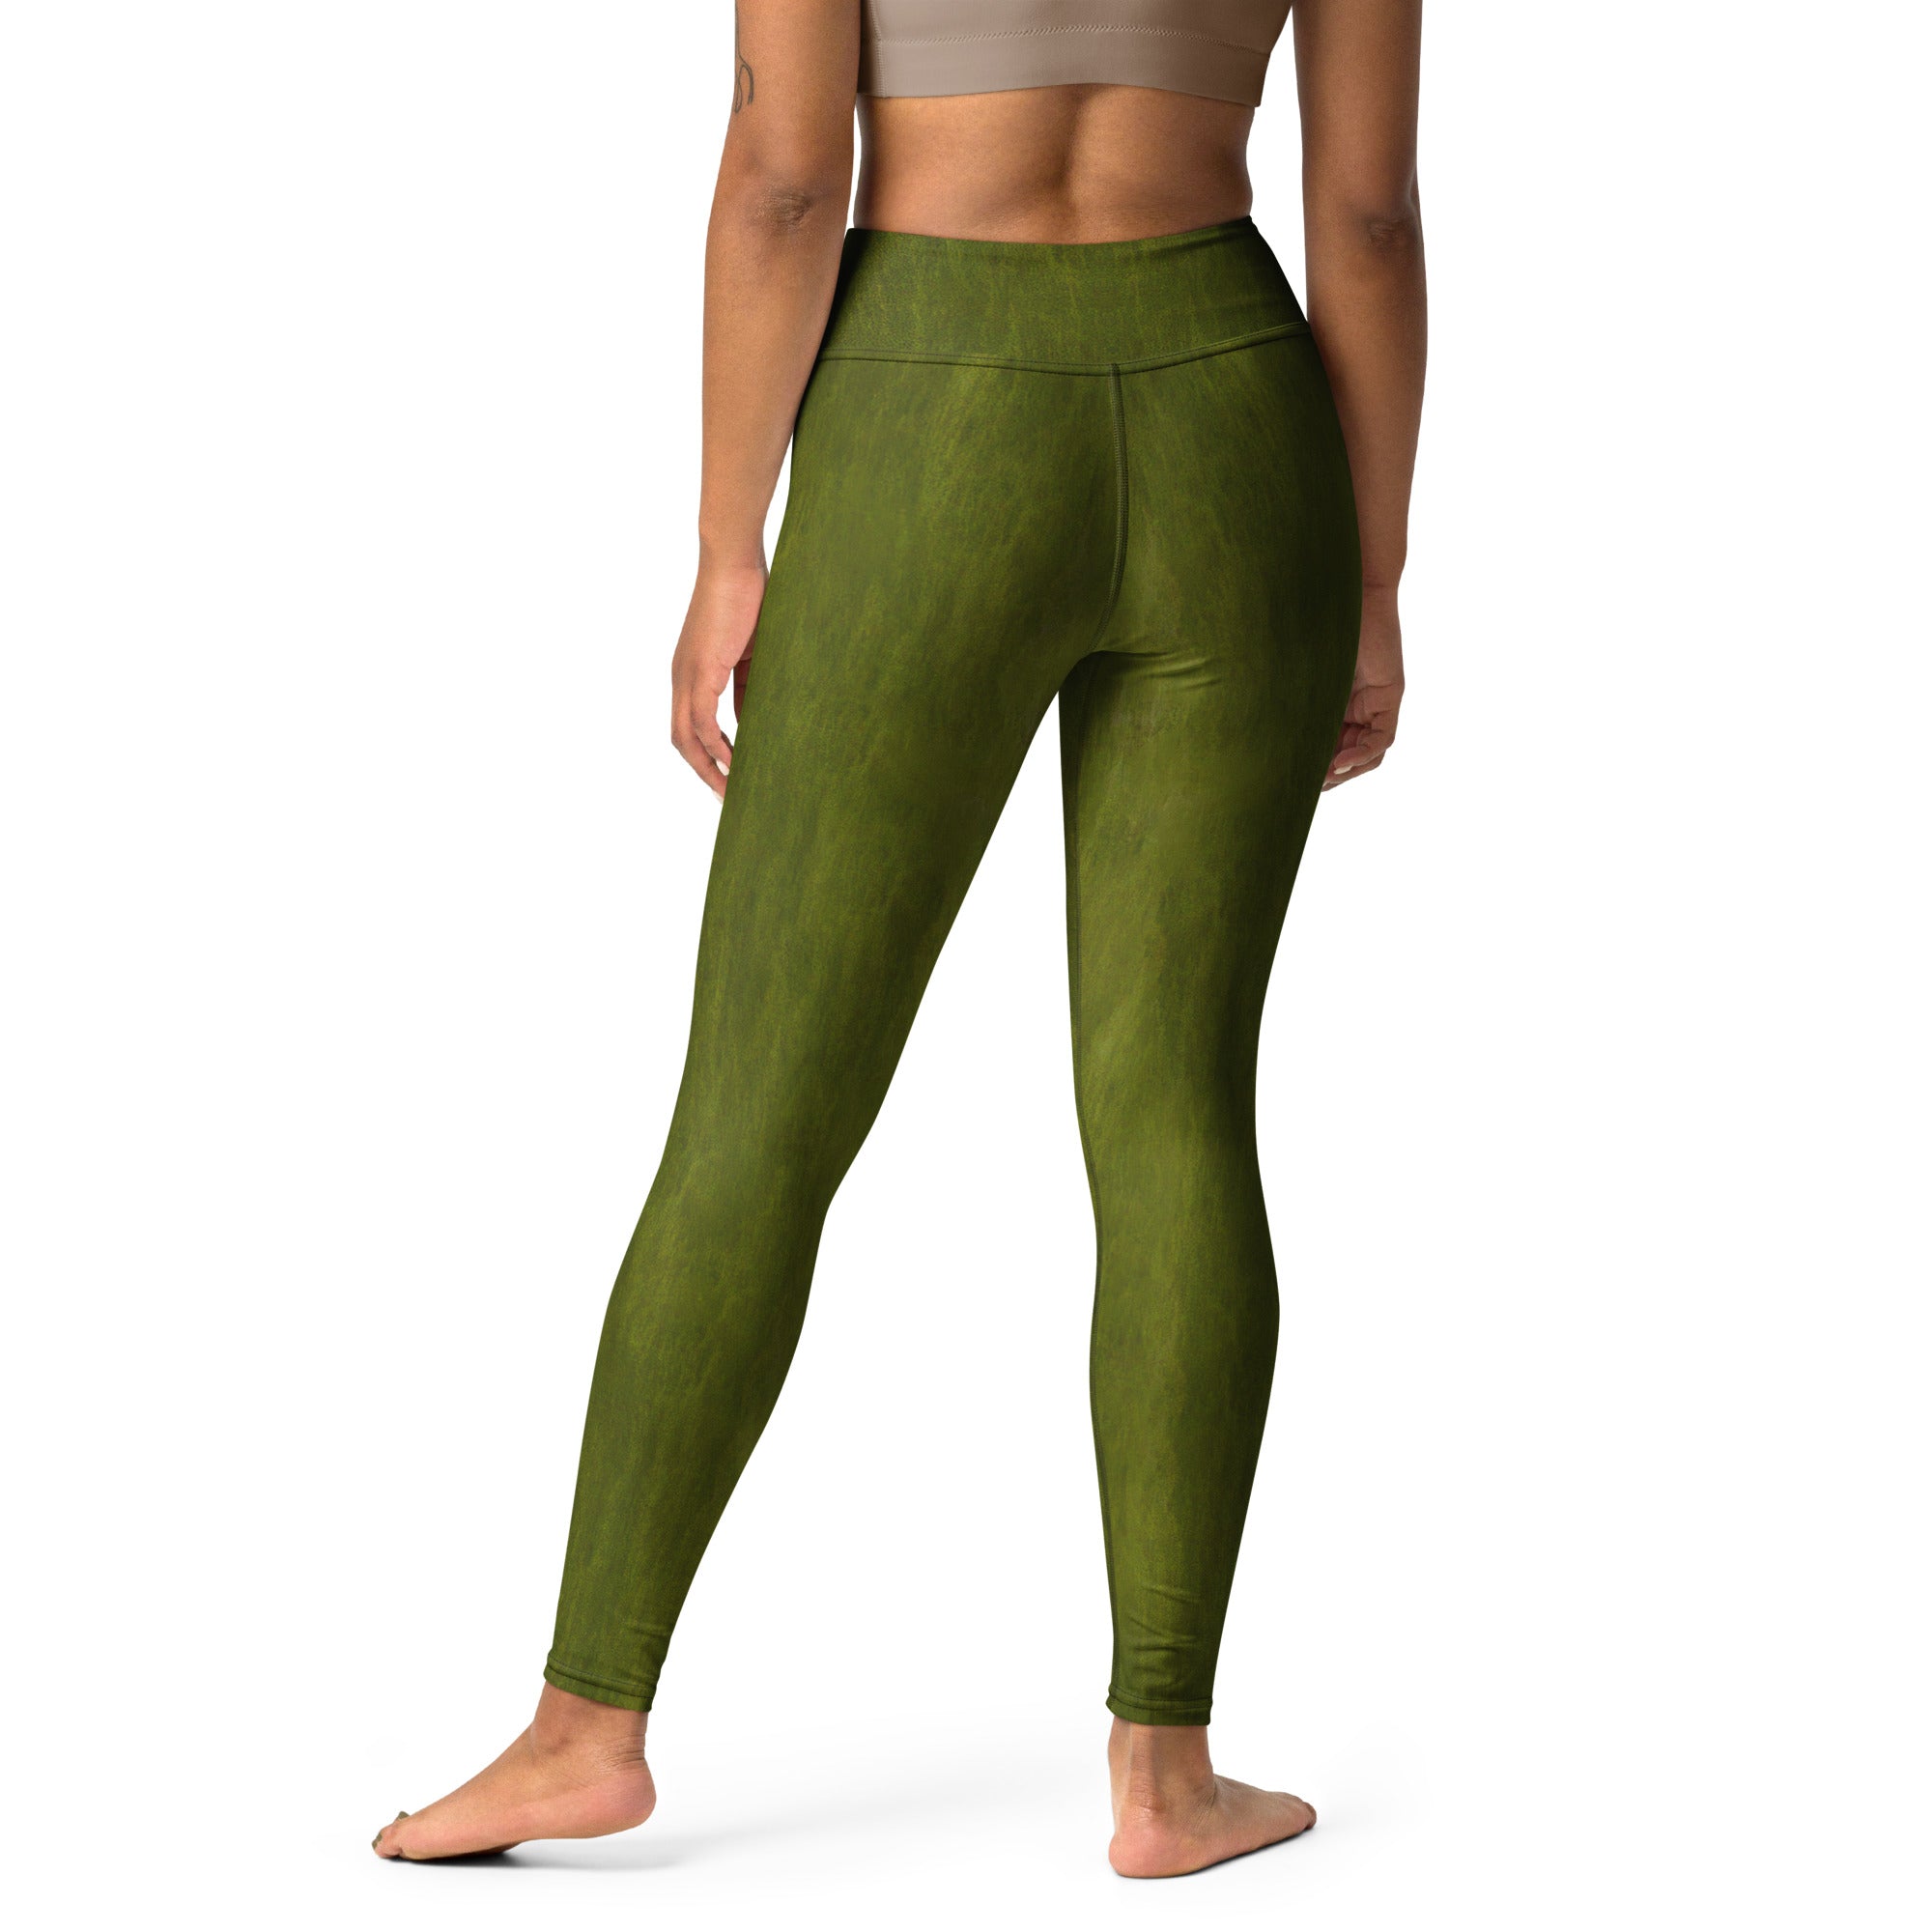 Elegant and Durable Brushed Bronze Leggings for Yoga Enthusiasts